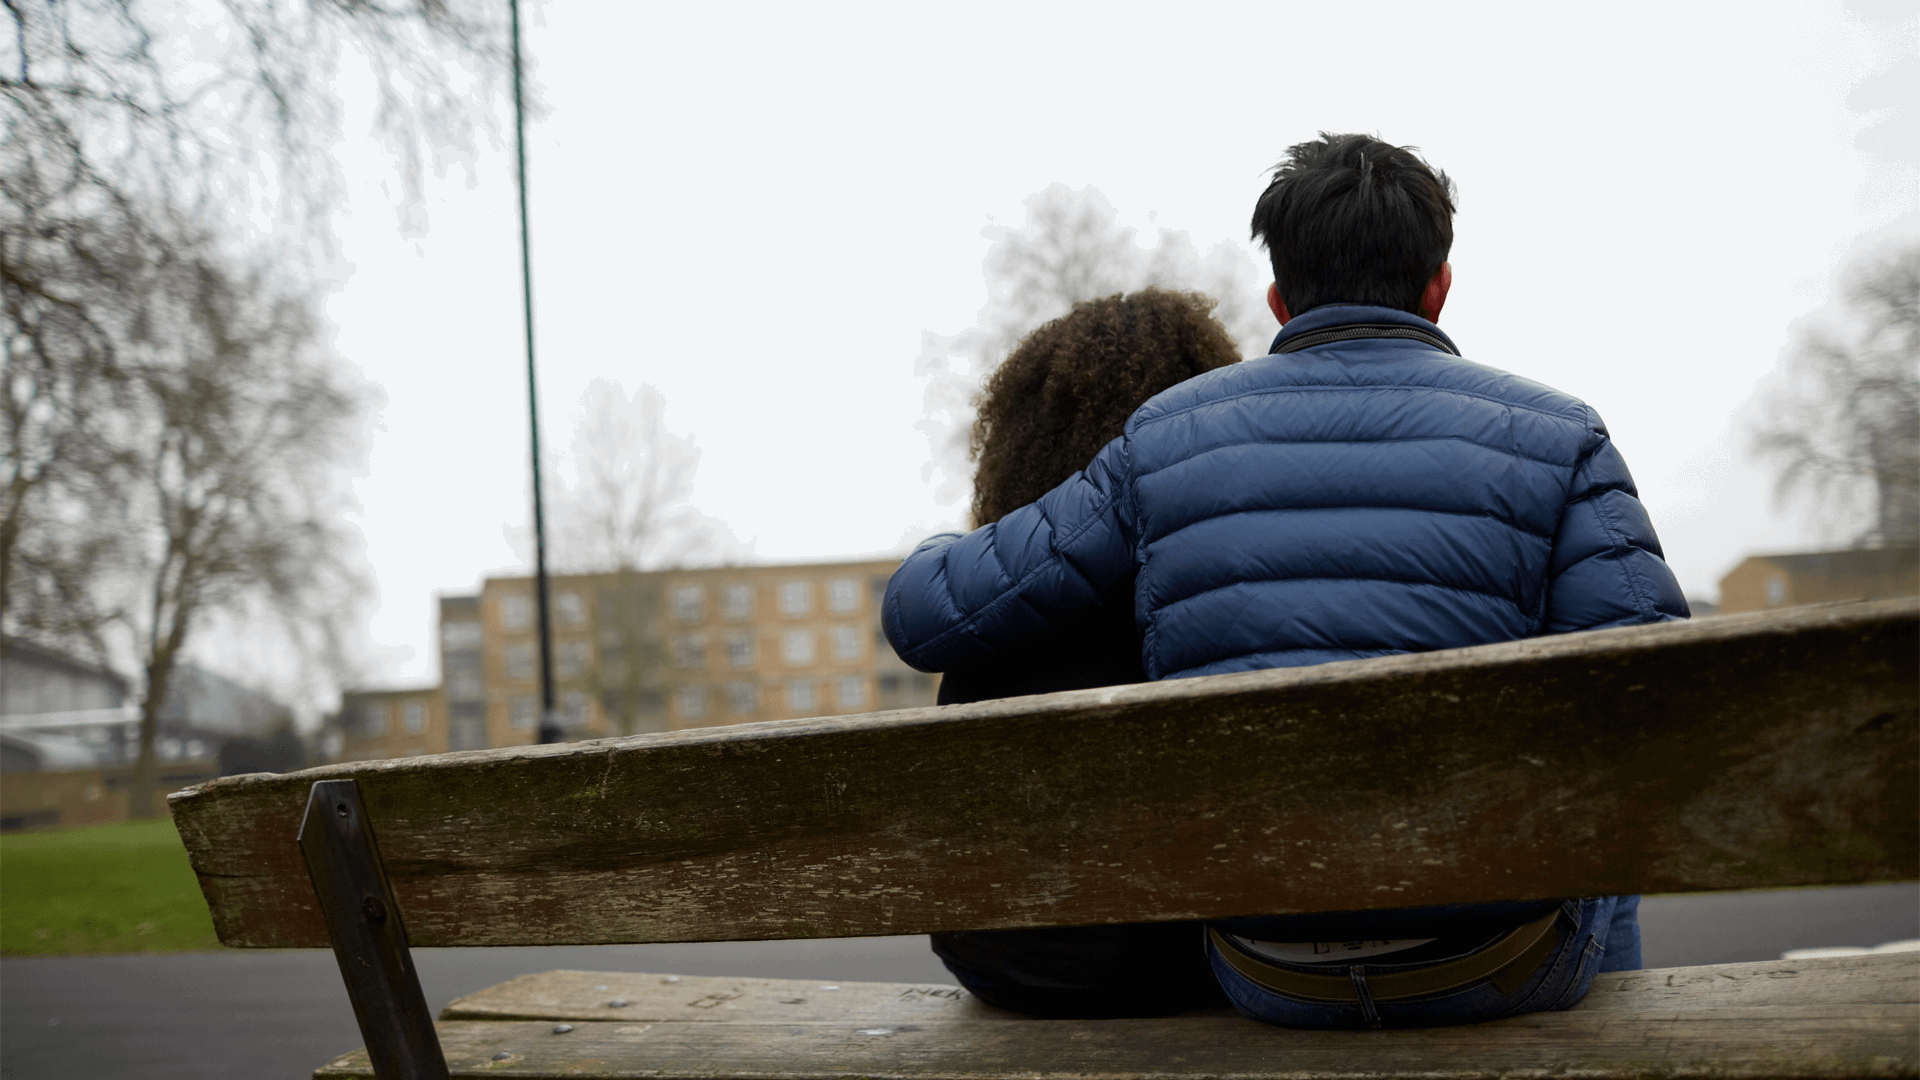 Two young people sitting together on a bench. One has their arm around the other.